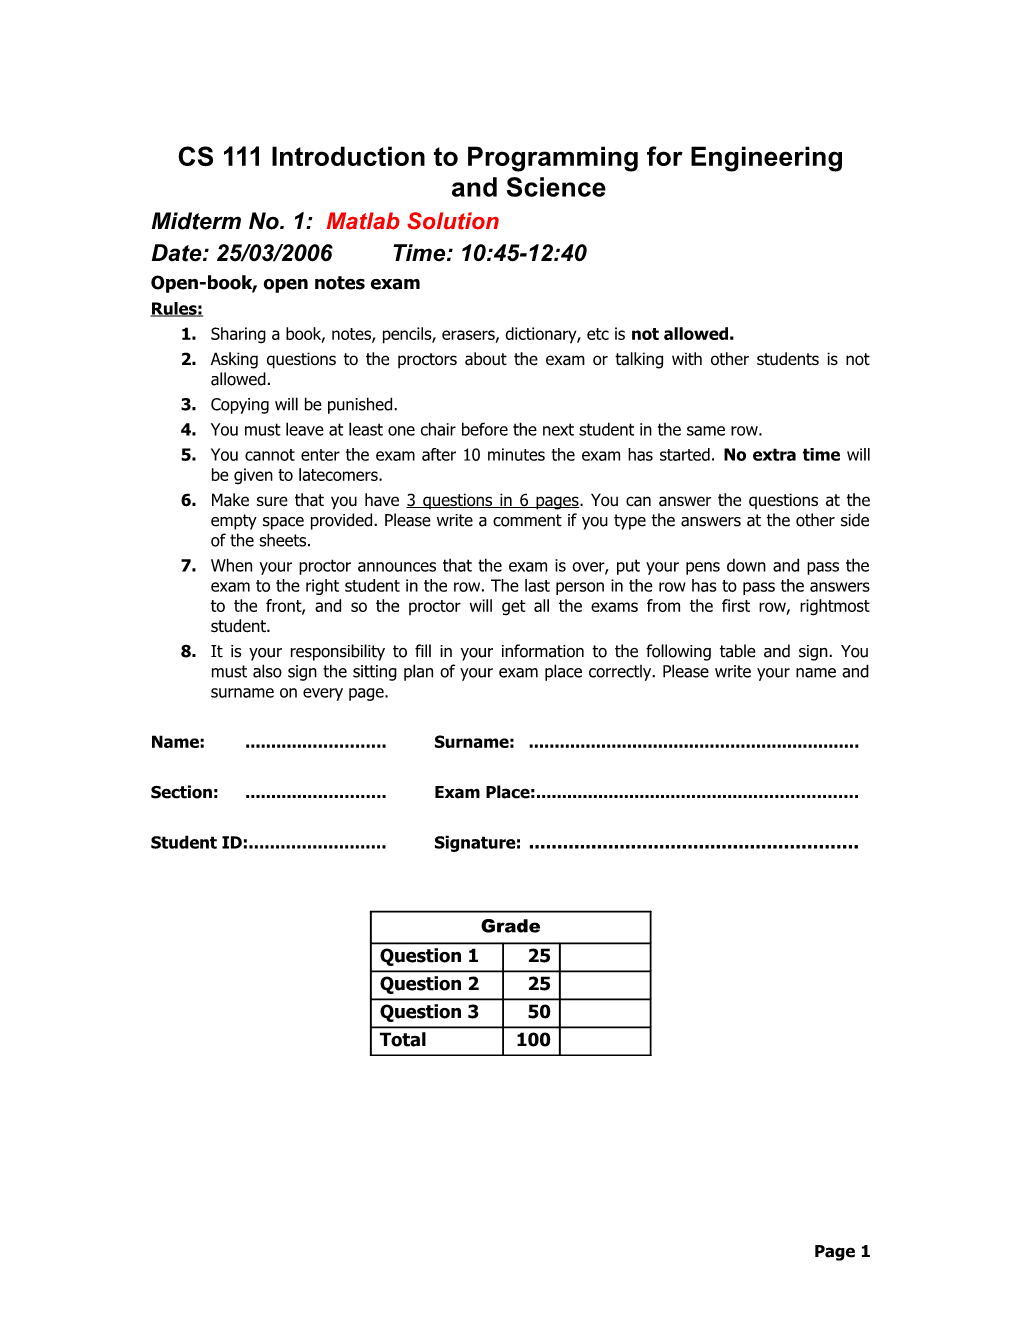 CS 111 Introduction to Programming for Engineering and Science